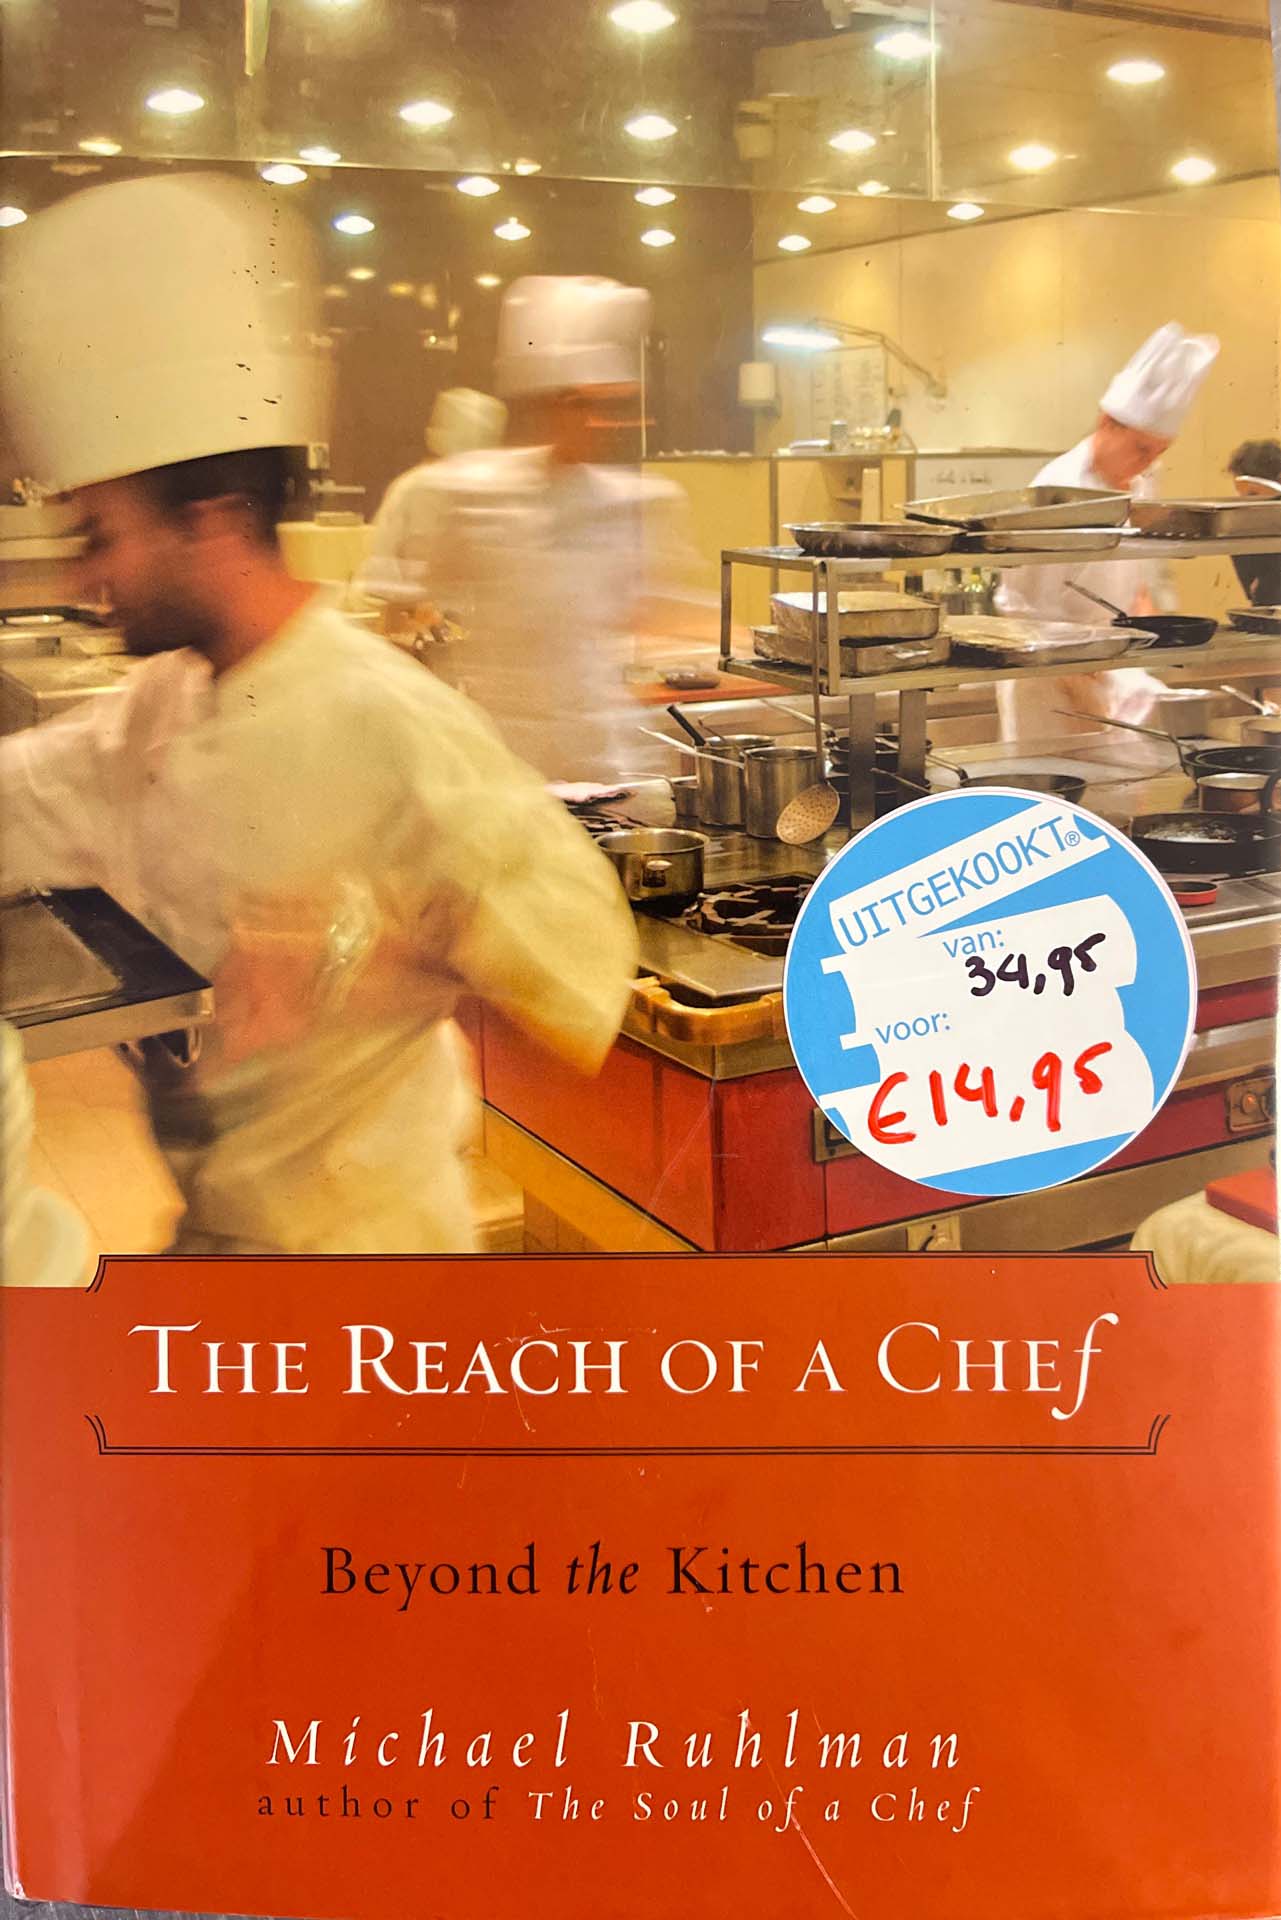 The reach of a chef, beyond the kitchen – Michel Ruhlman